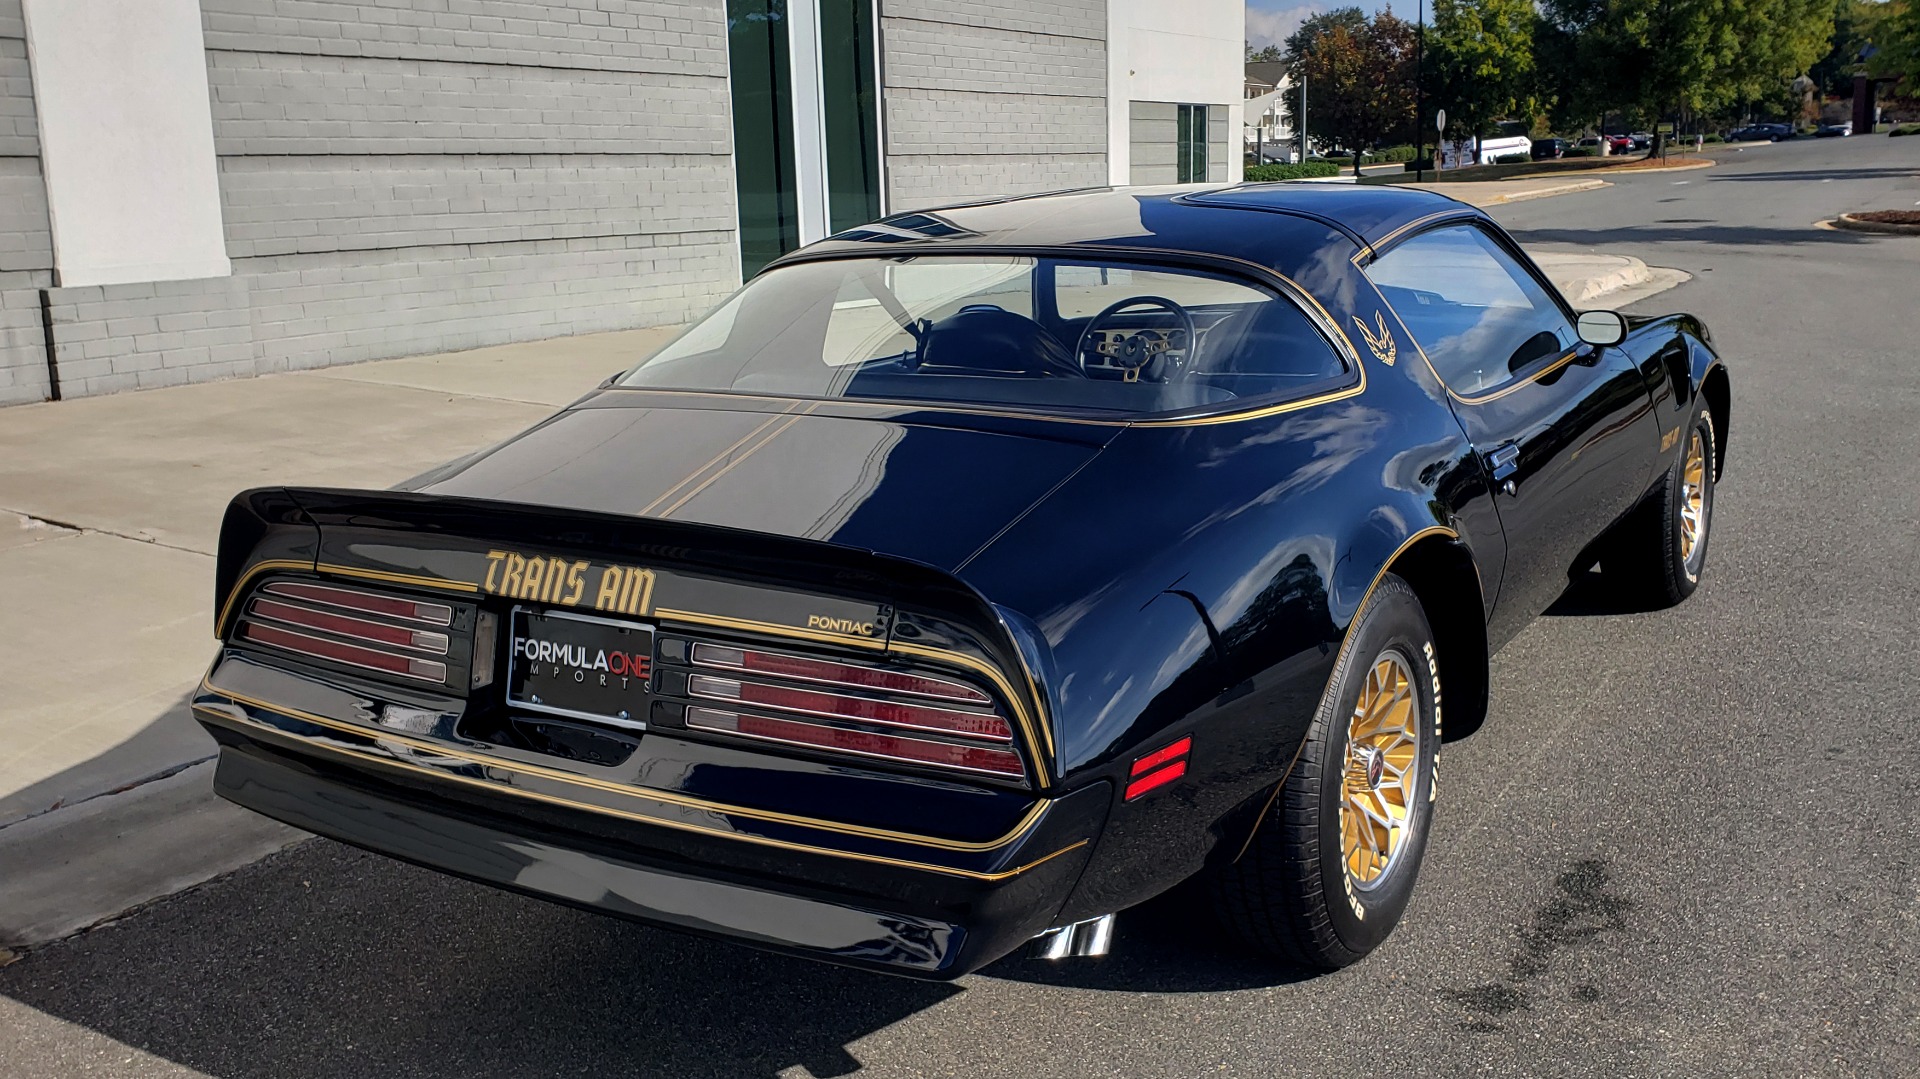 Used 1977 Pontiac TRANS AM Y82 SPECIAL EDITION BANDIT / 6.6L / 4-SPEED MANUAL / LOW MILES for sale Sold at Formula Imports in Charlotte NC 28227 15